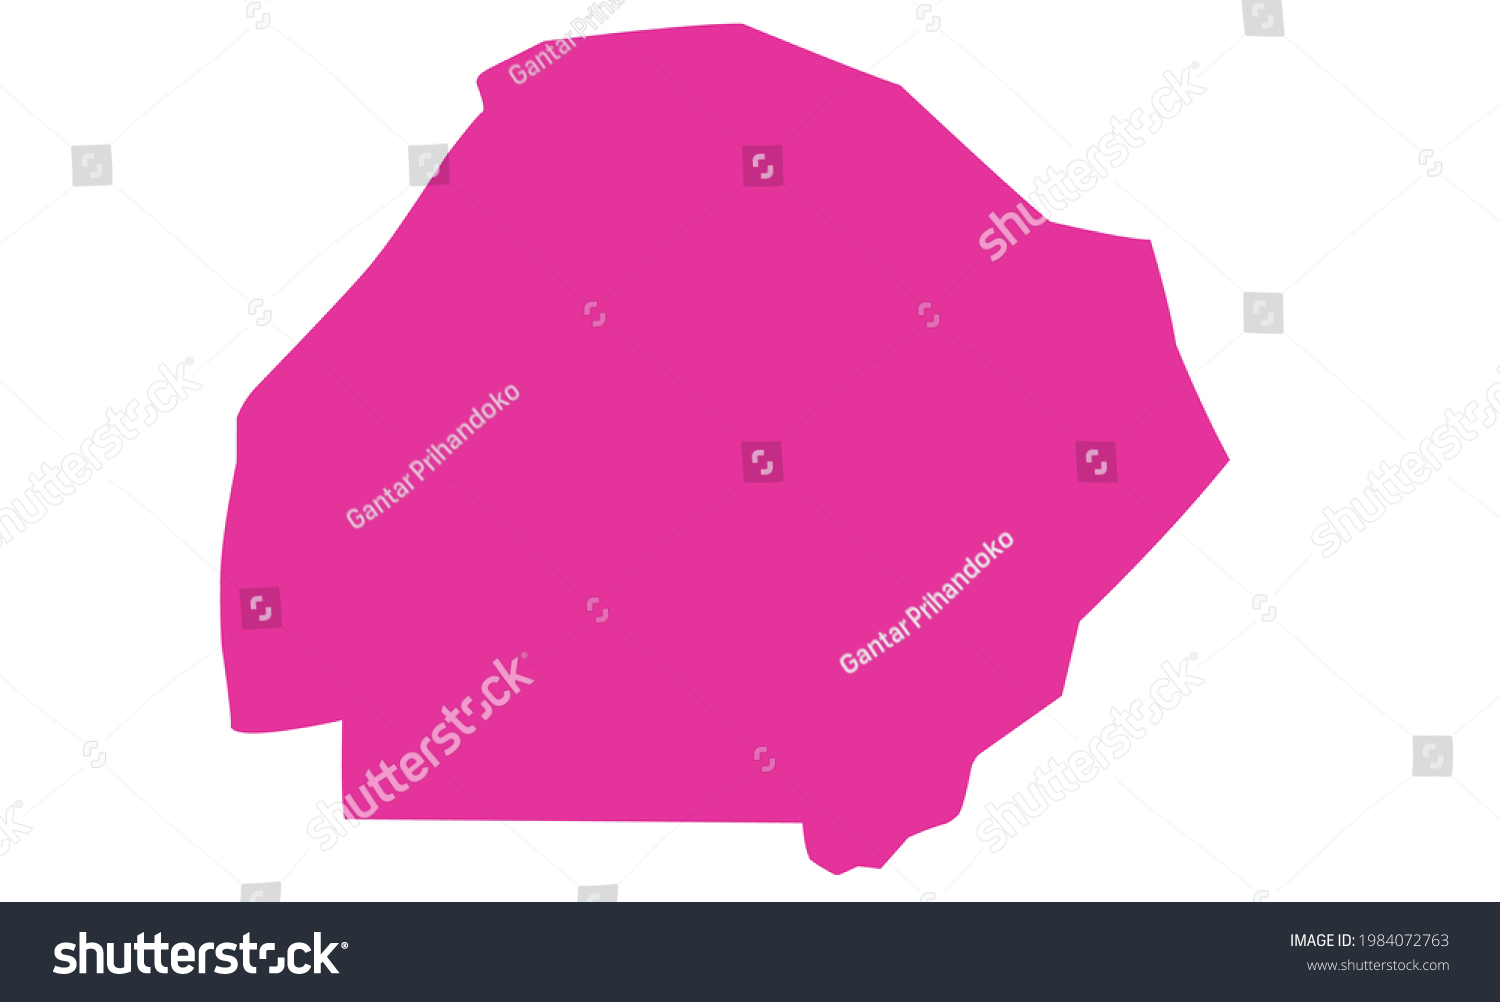 SVG of purple silhouette map of the city of Bahawalpur in Pakistan svg